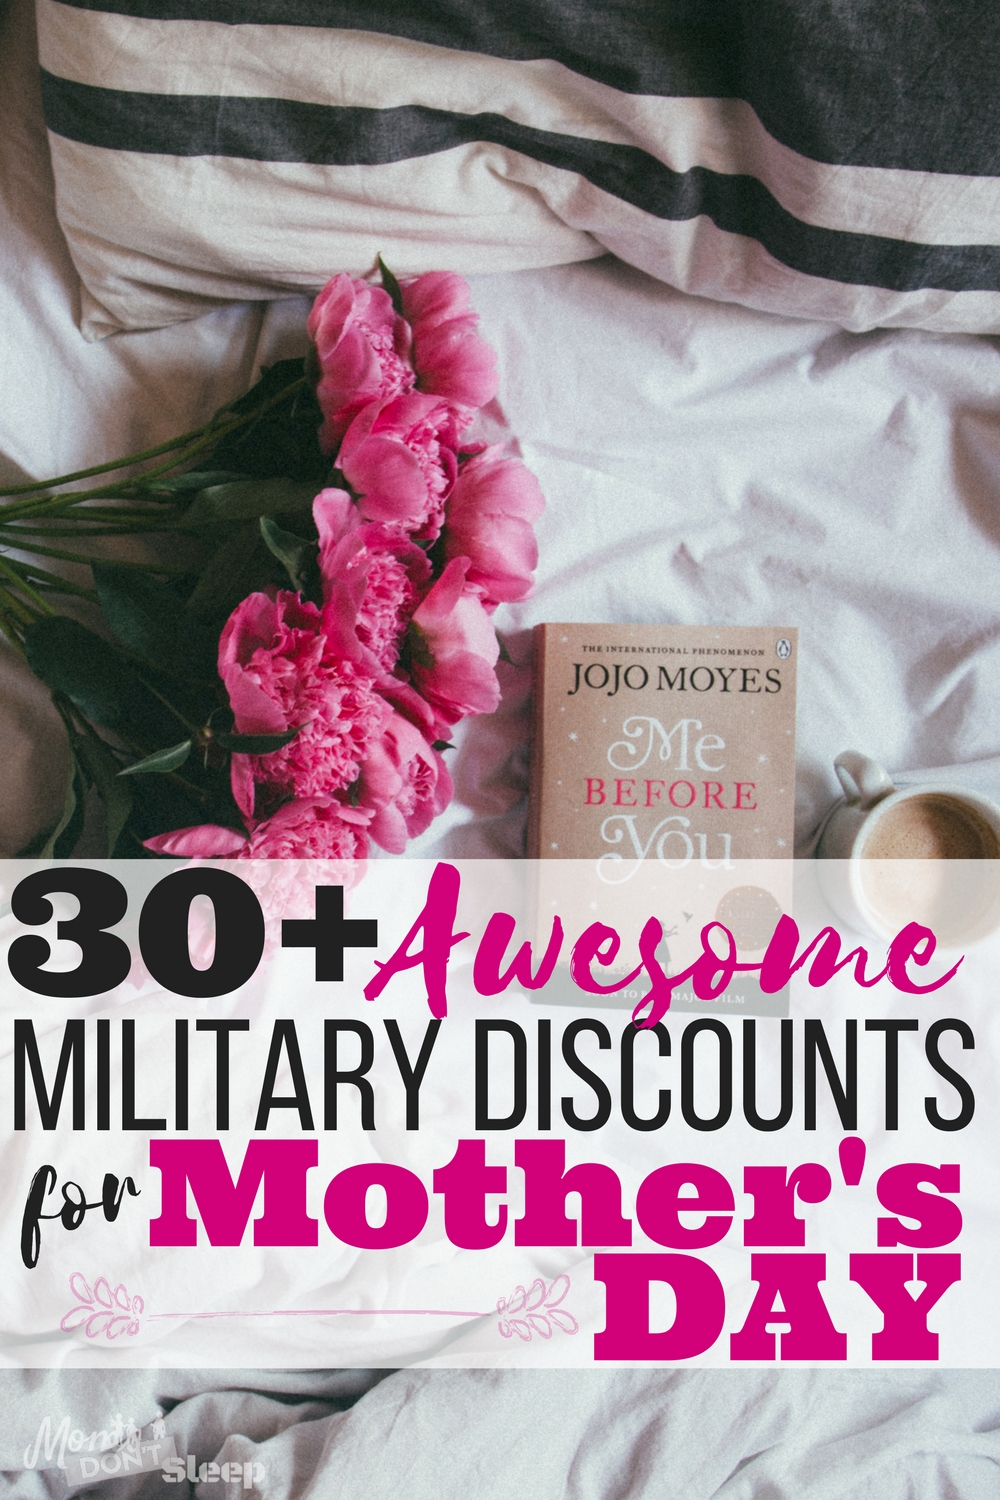 These are great! Holidays can be such a strain on our budget, I'm so glad there are military discounts for mothers day so I can actually get my mom something awesome this year! Saved!